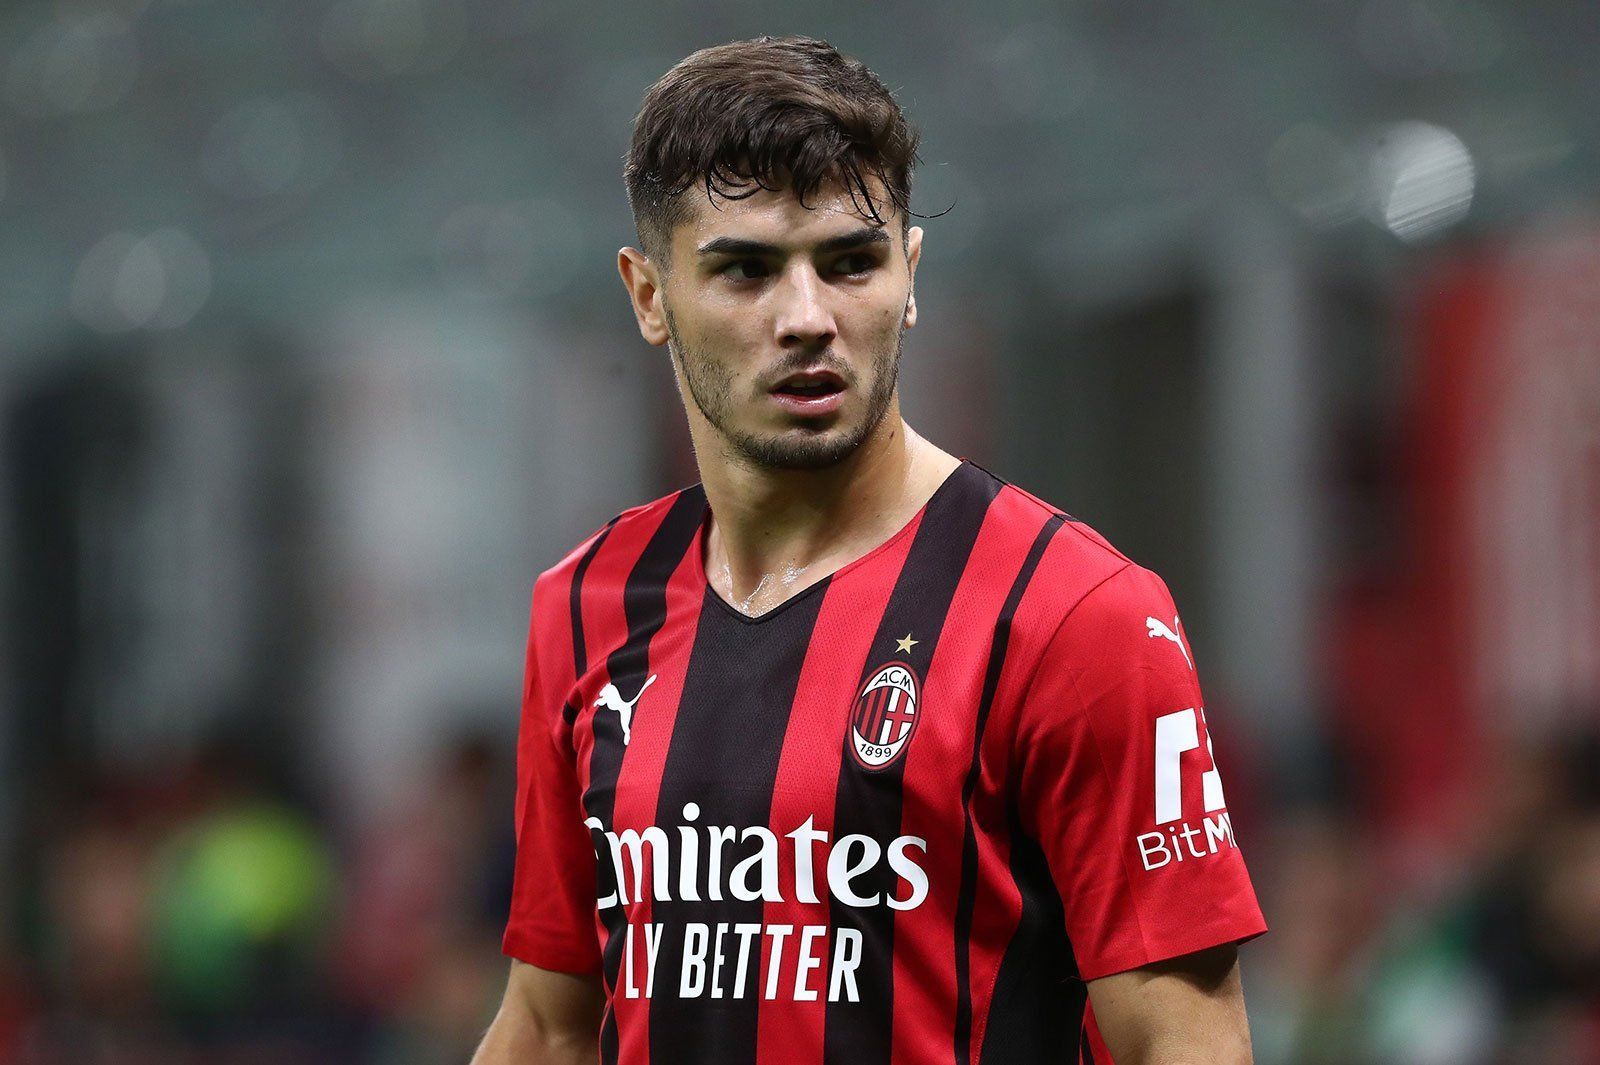 Brahim Diaz is currently gaining valuable experience in Milan following his loan move from Real Madrid.